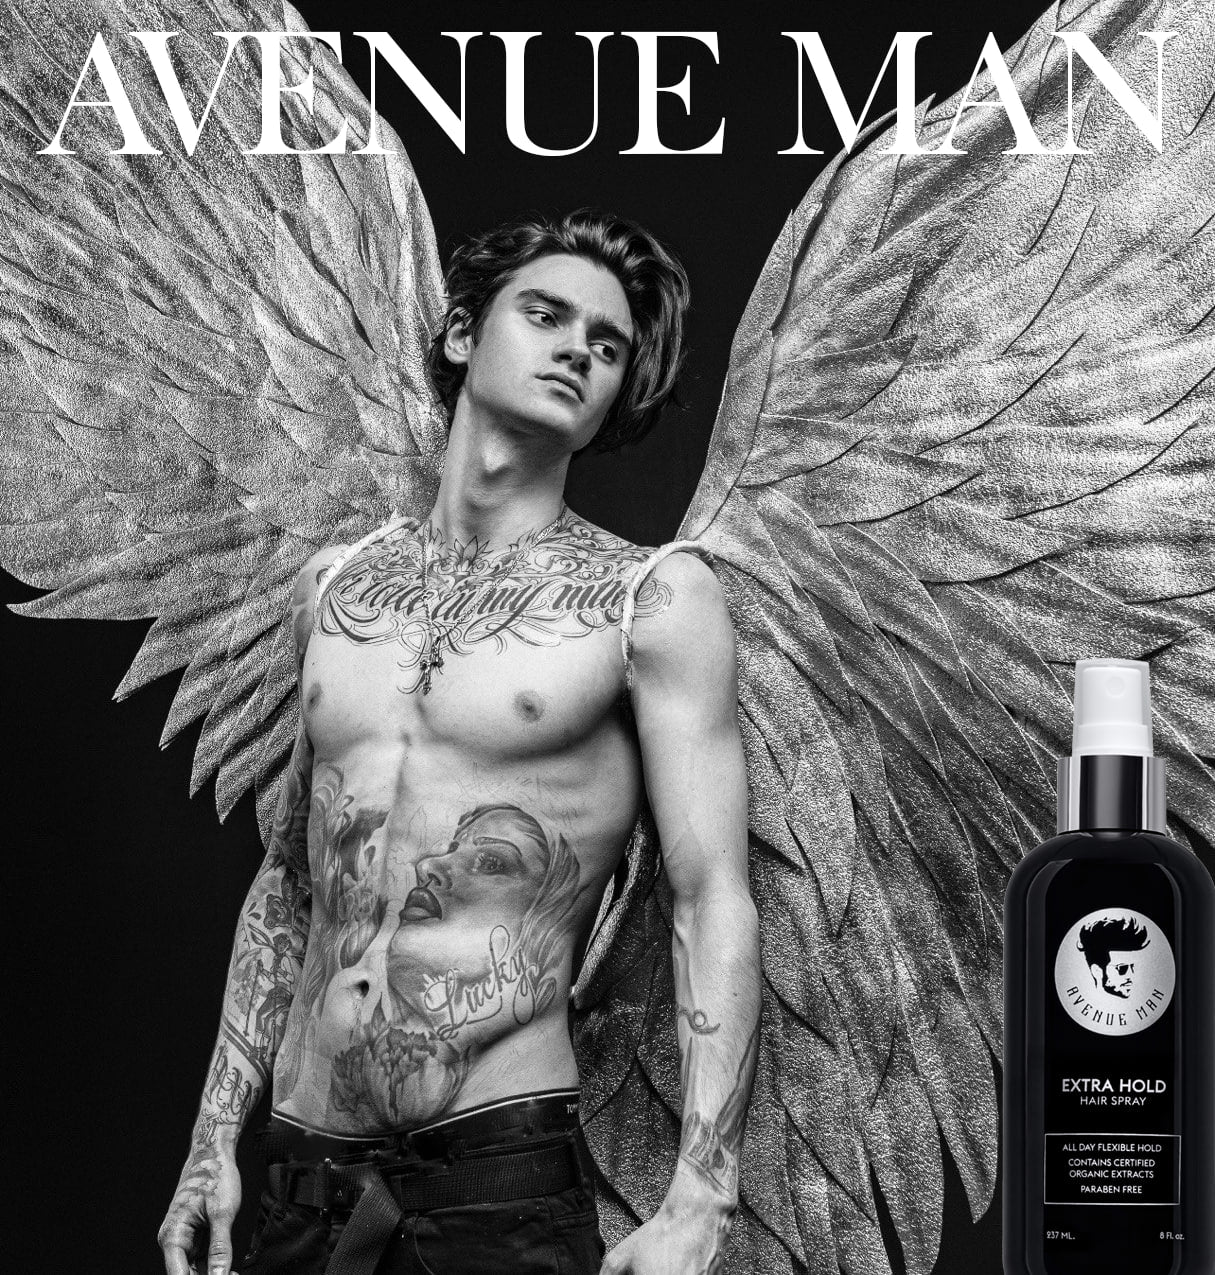 Master Your Style: Avenue Man Extra Hold Hair Spray